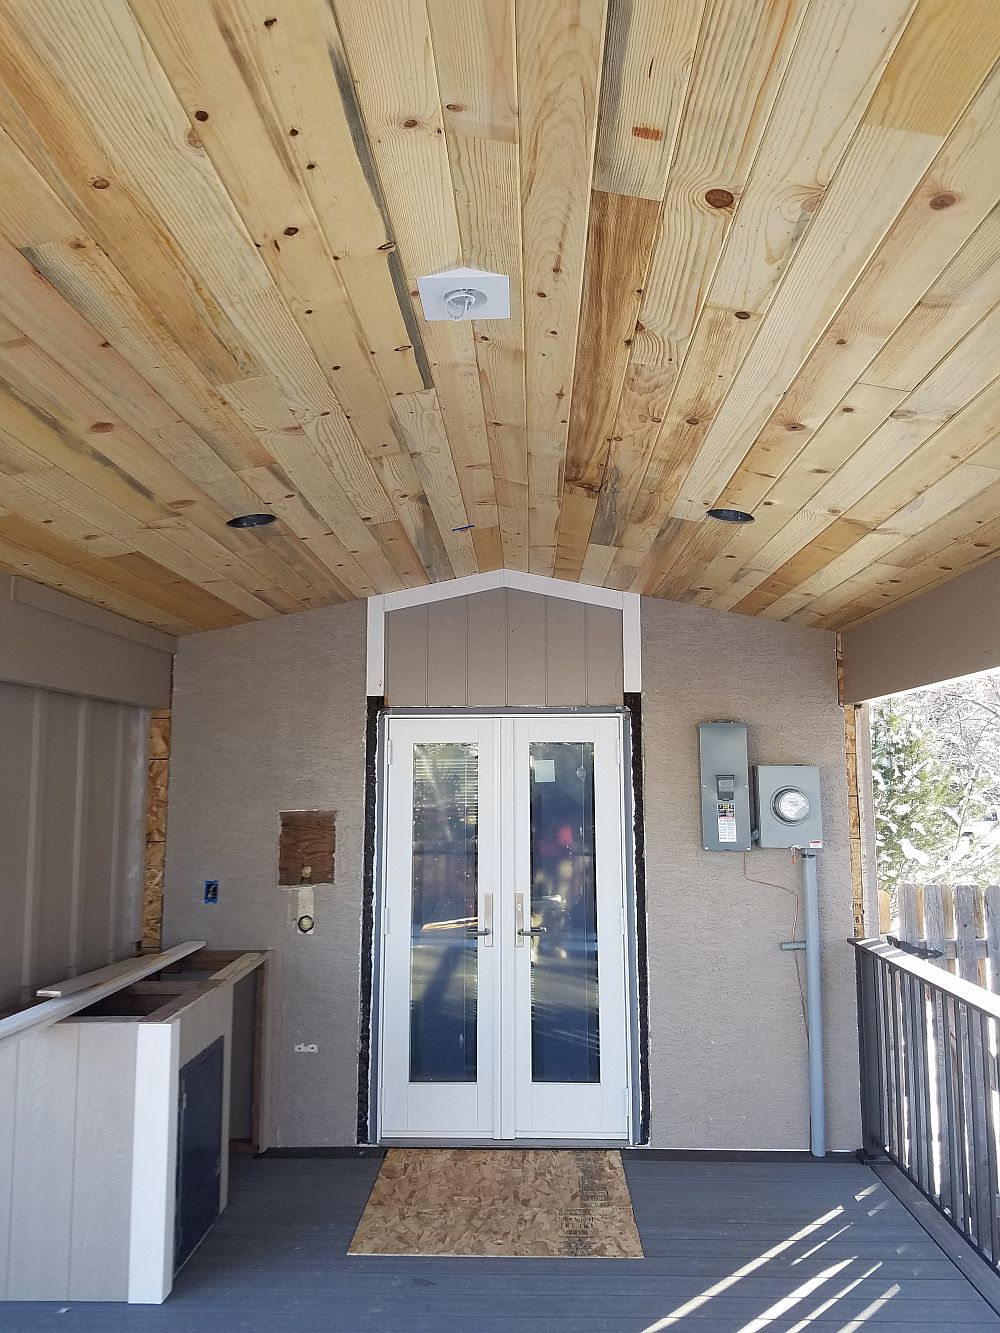 Tongue and groove pine ceiling for a gabled deck cover